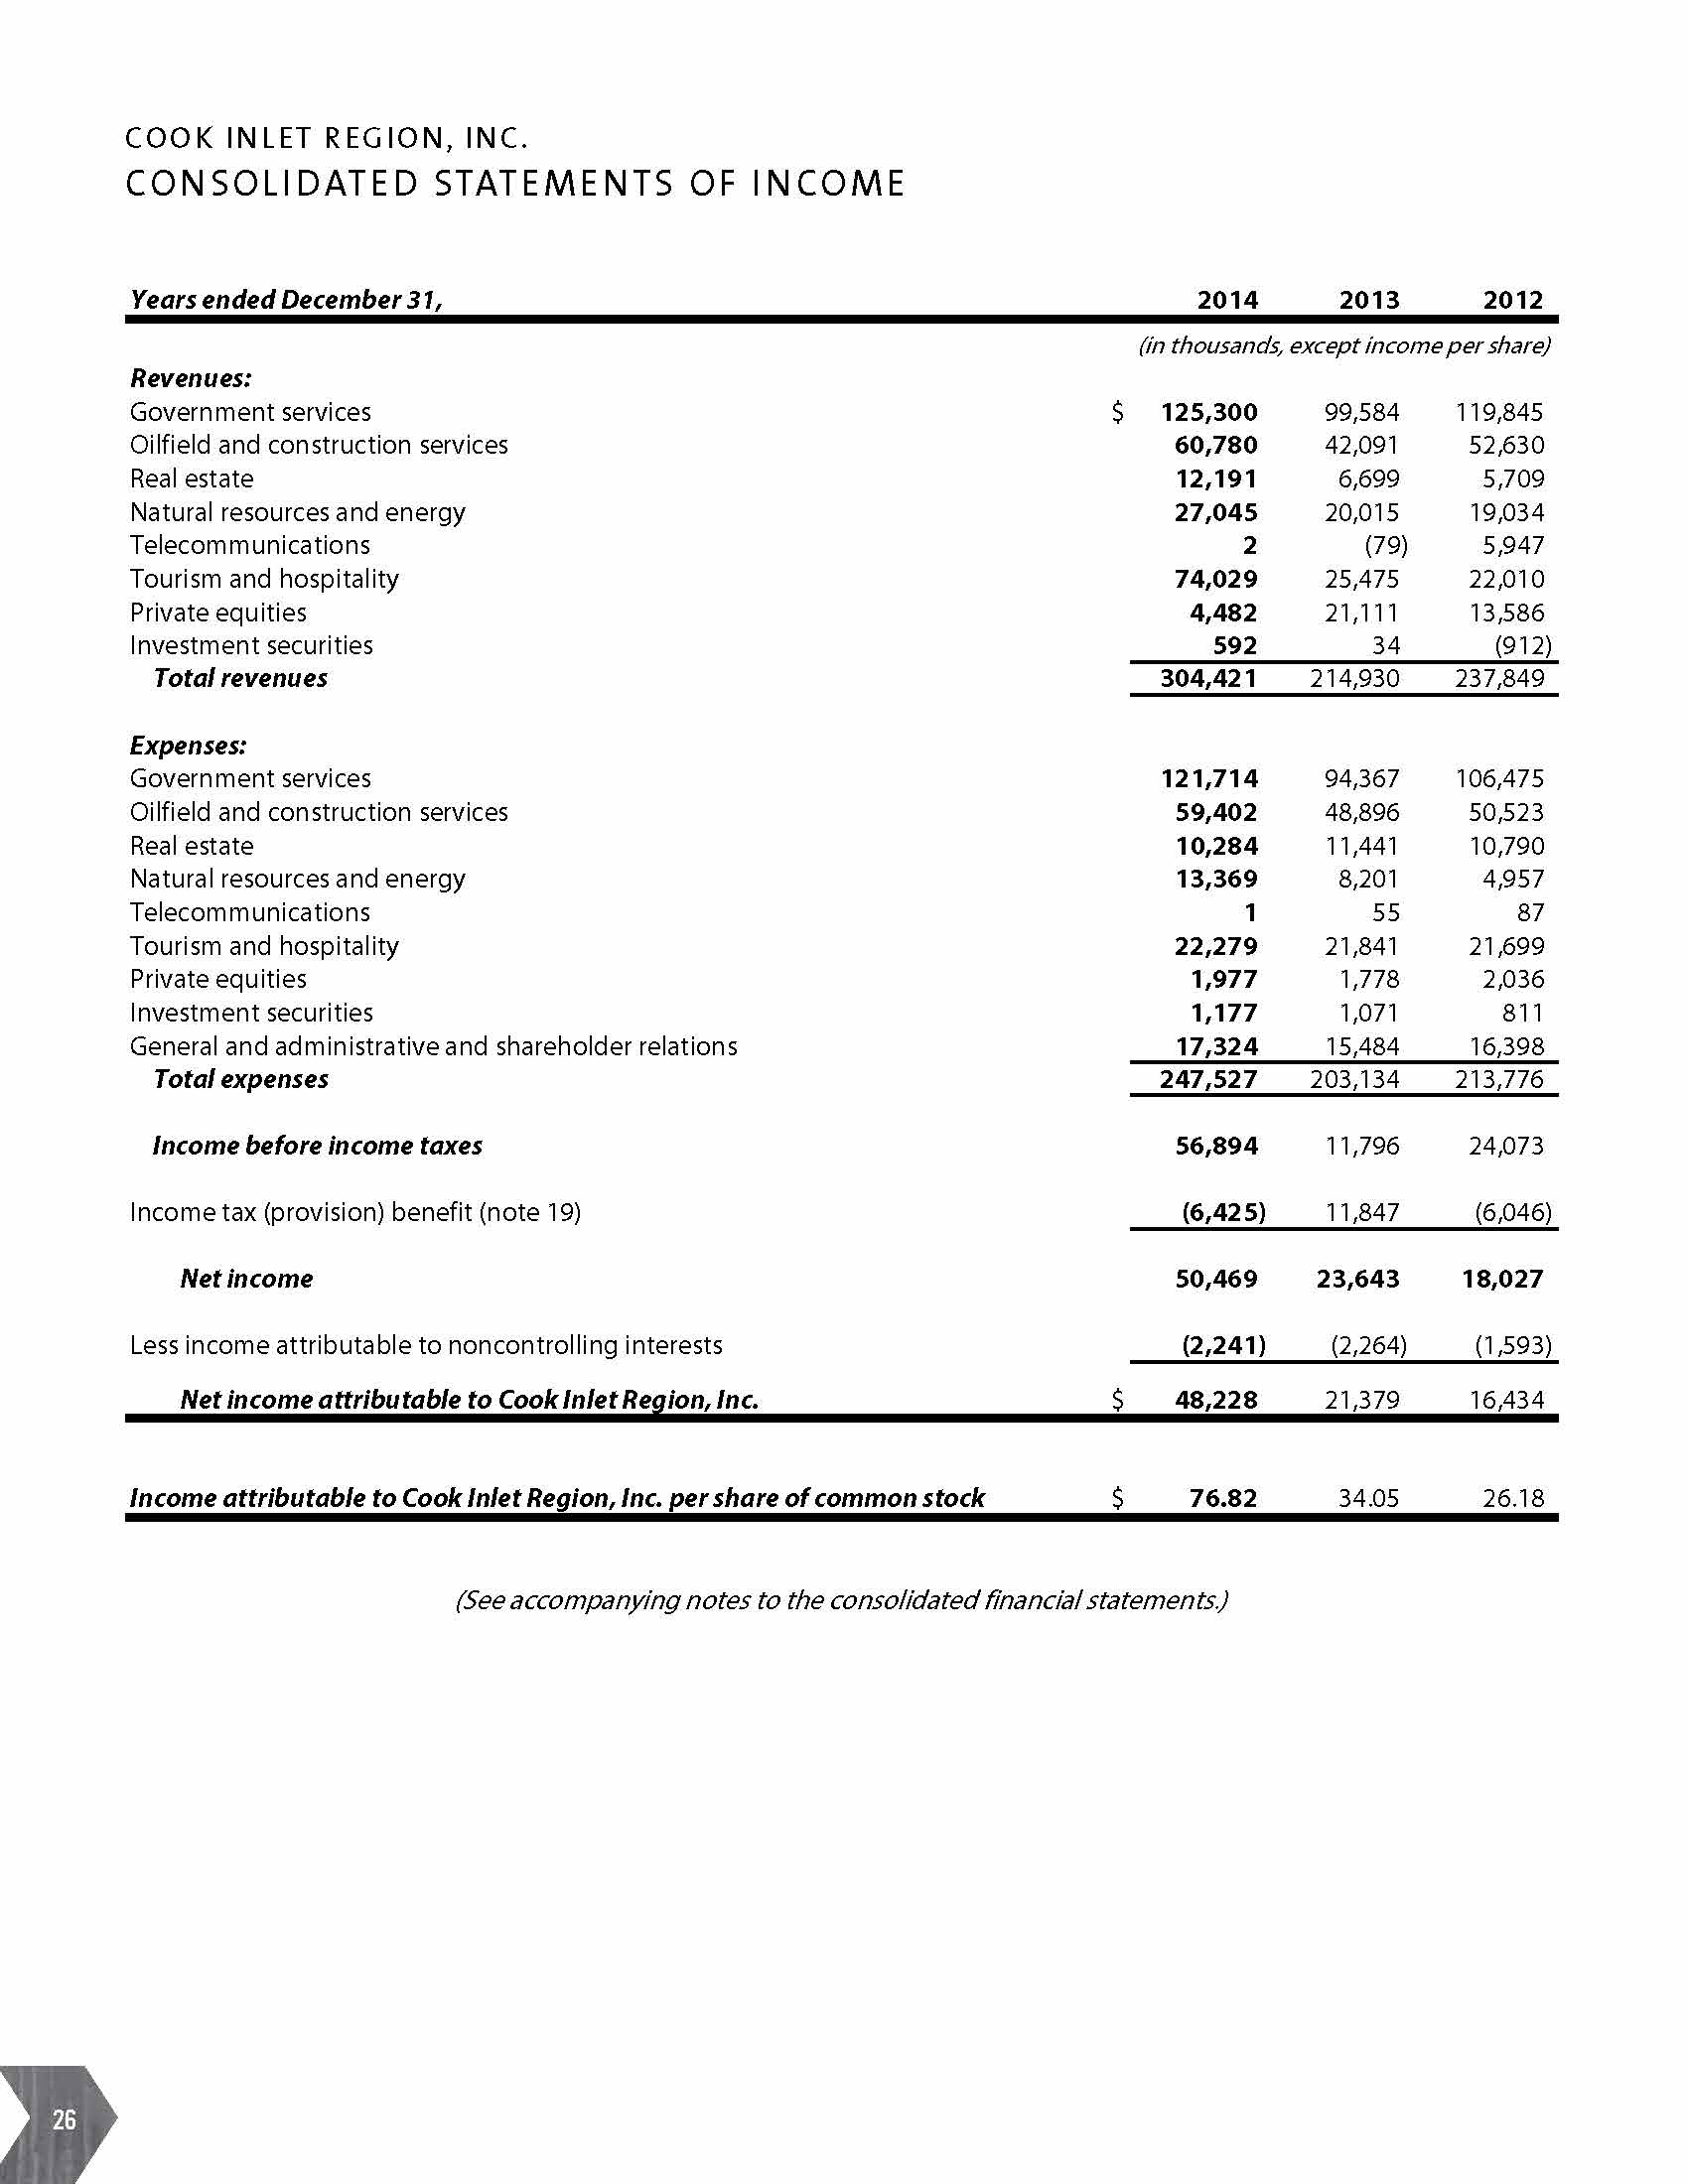 Annual Report - Consolidated Income